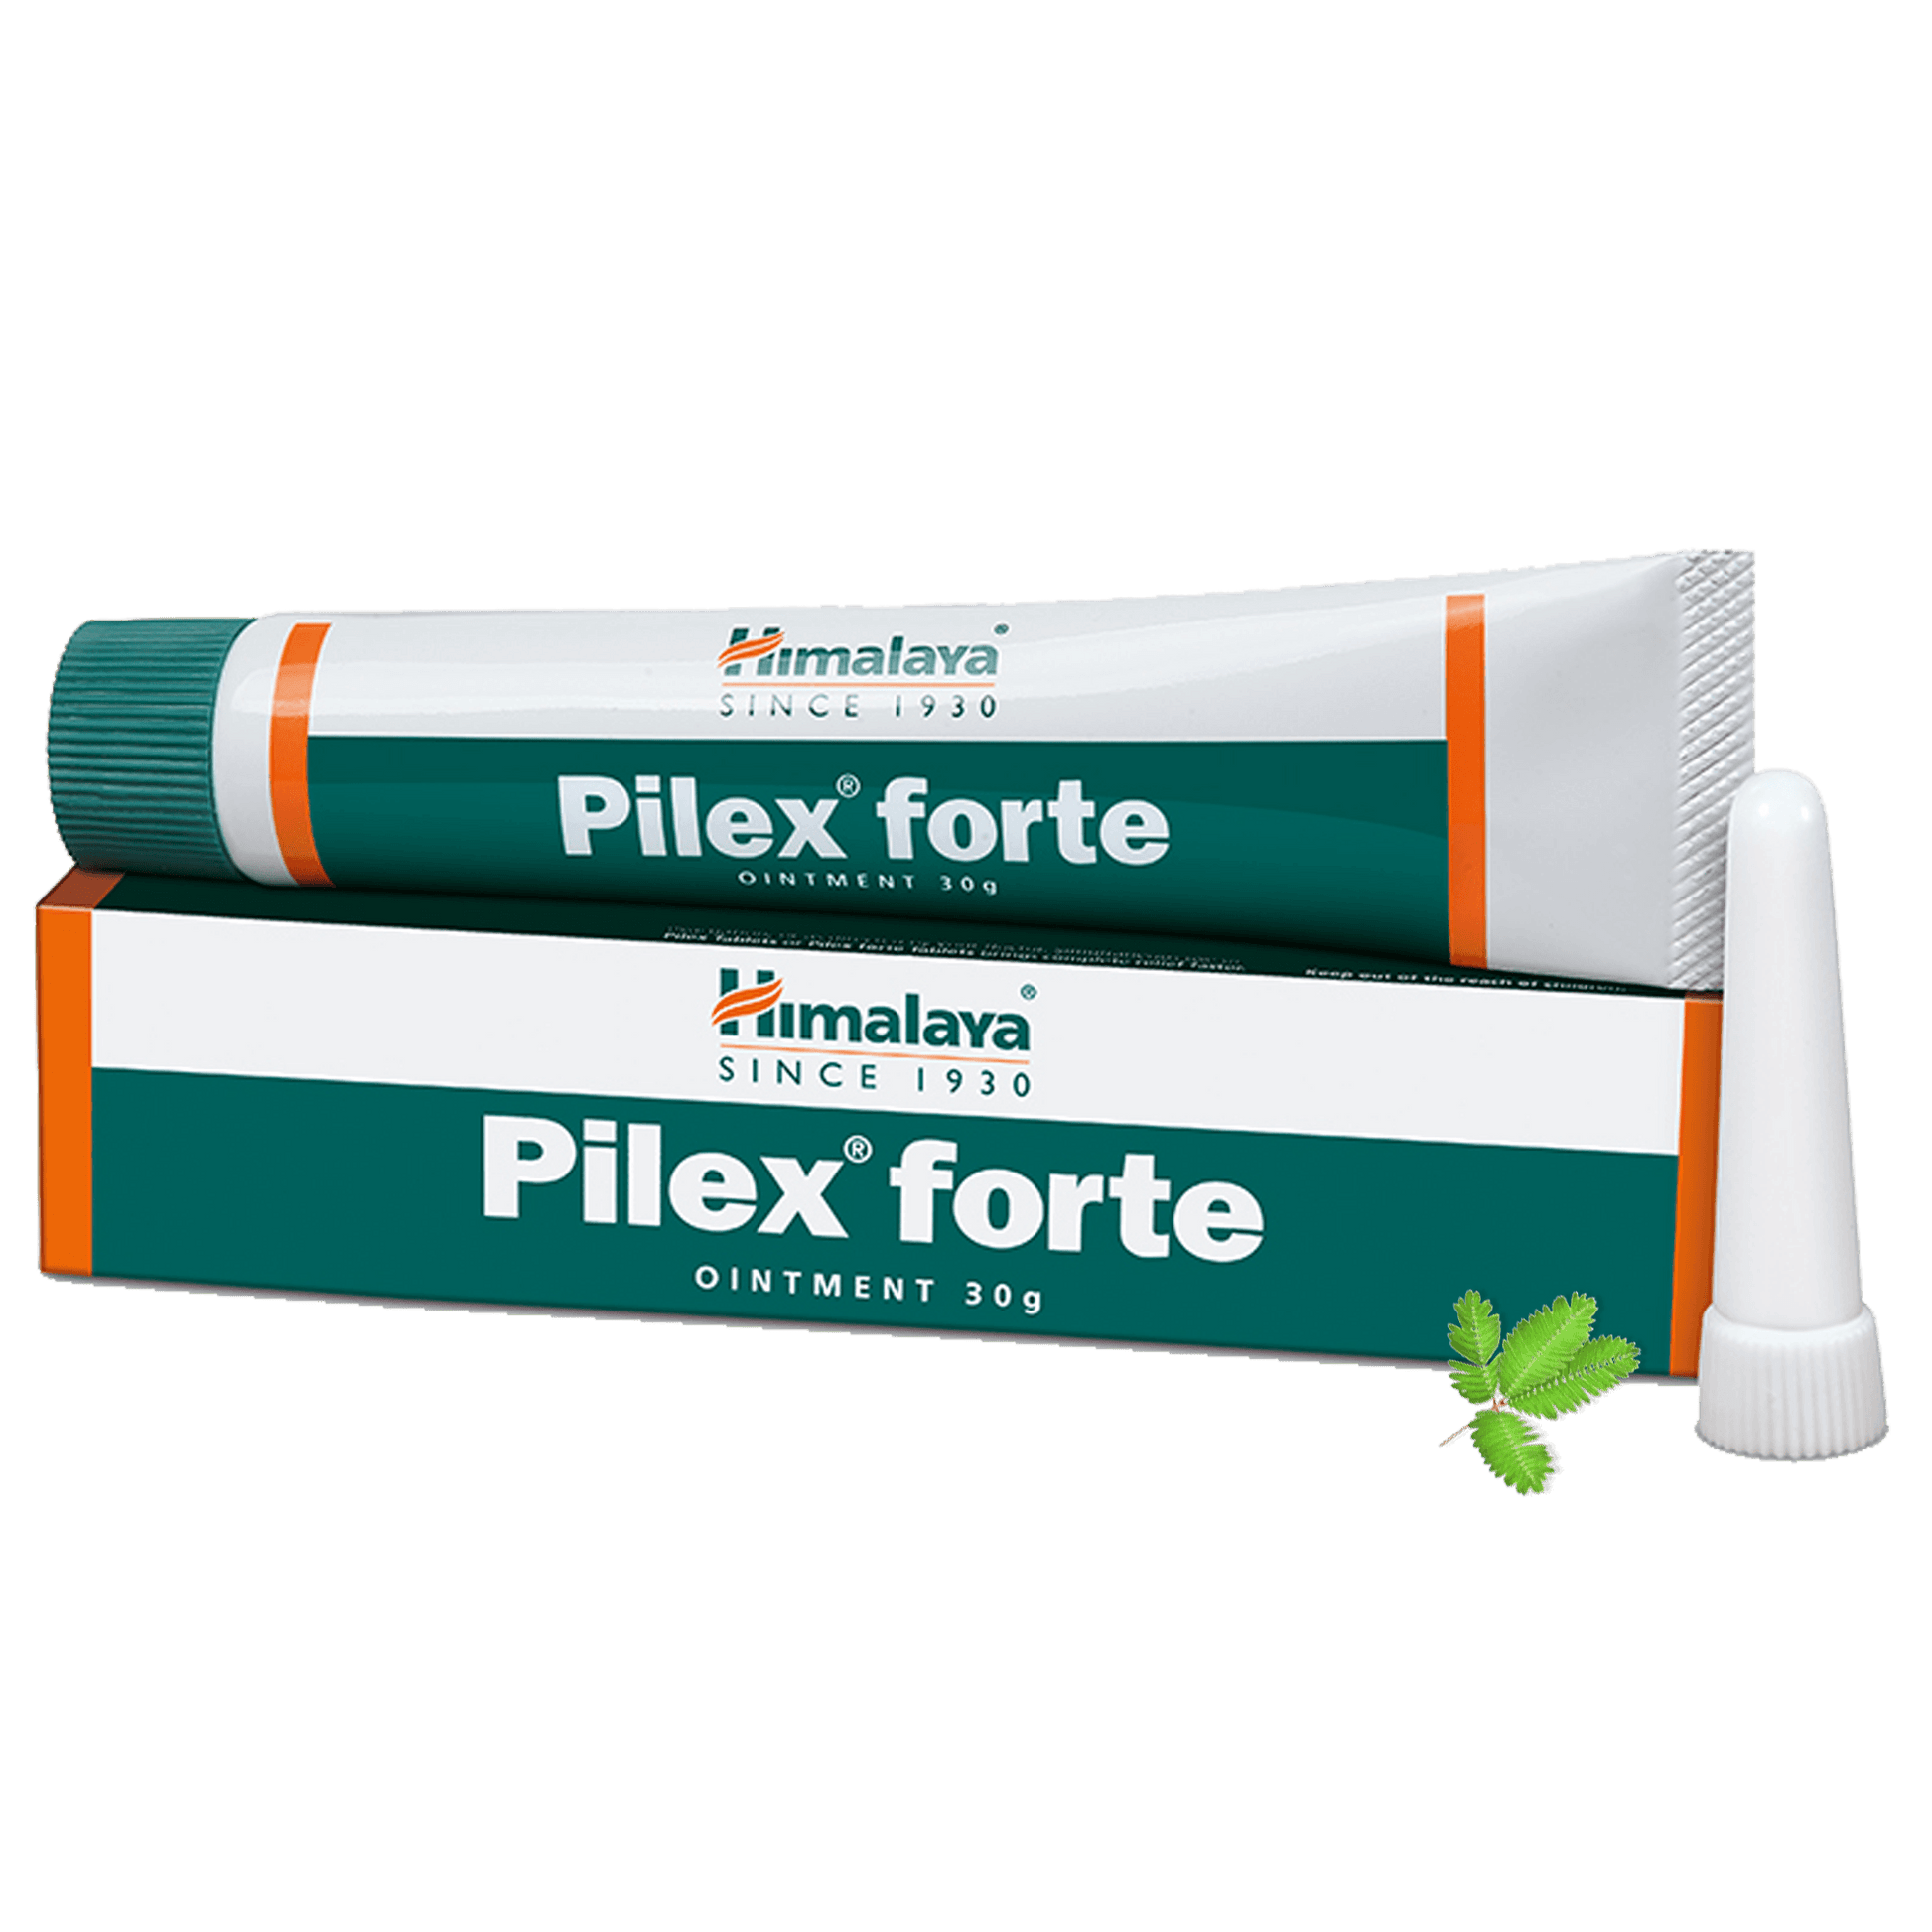 Shop Himalaya Pilex forte Ointment 30g at price 85.00 from Himalaya Online - Ayush Care